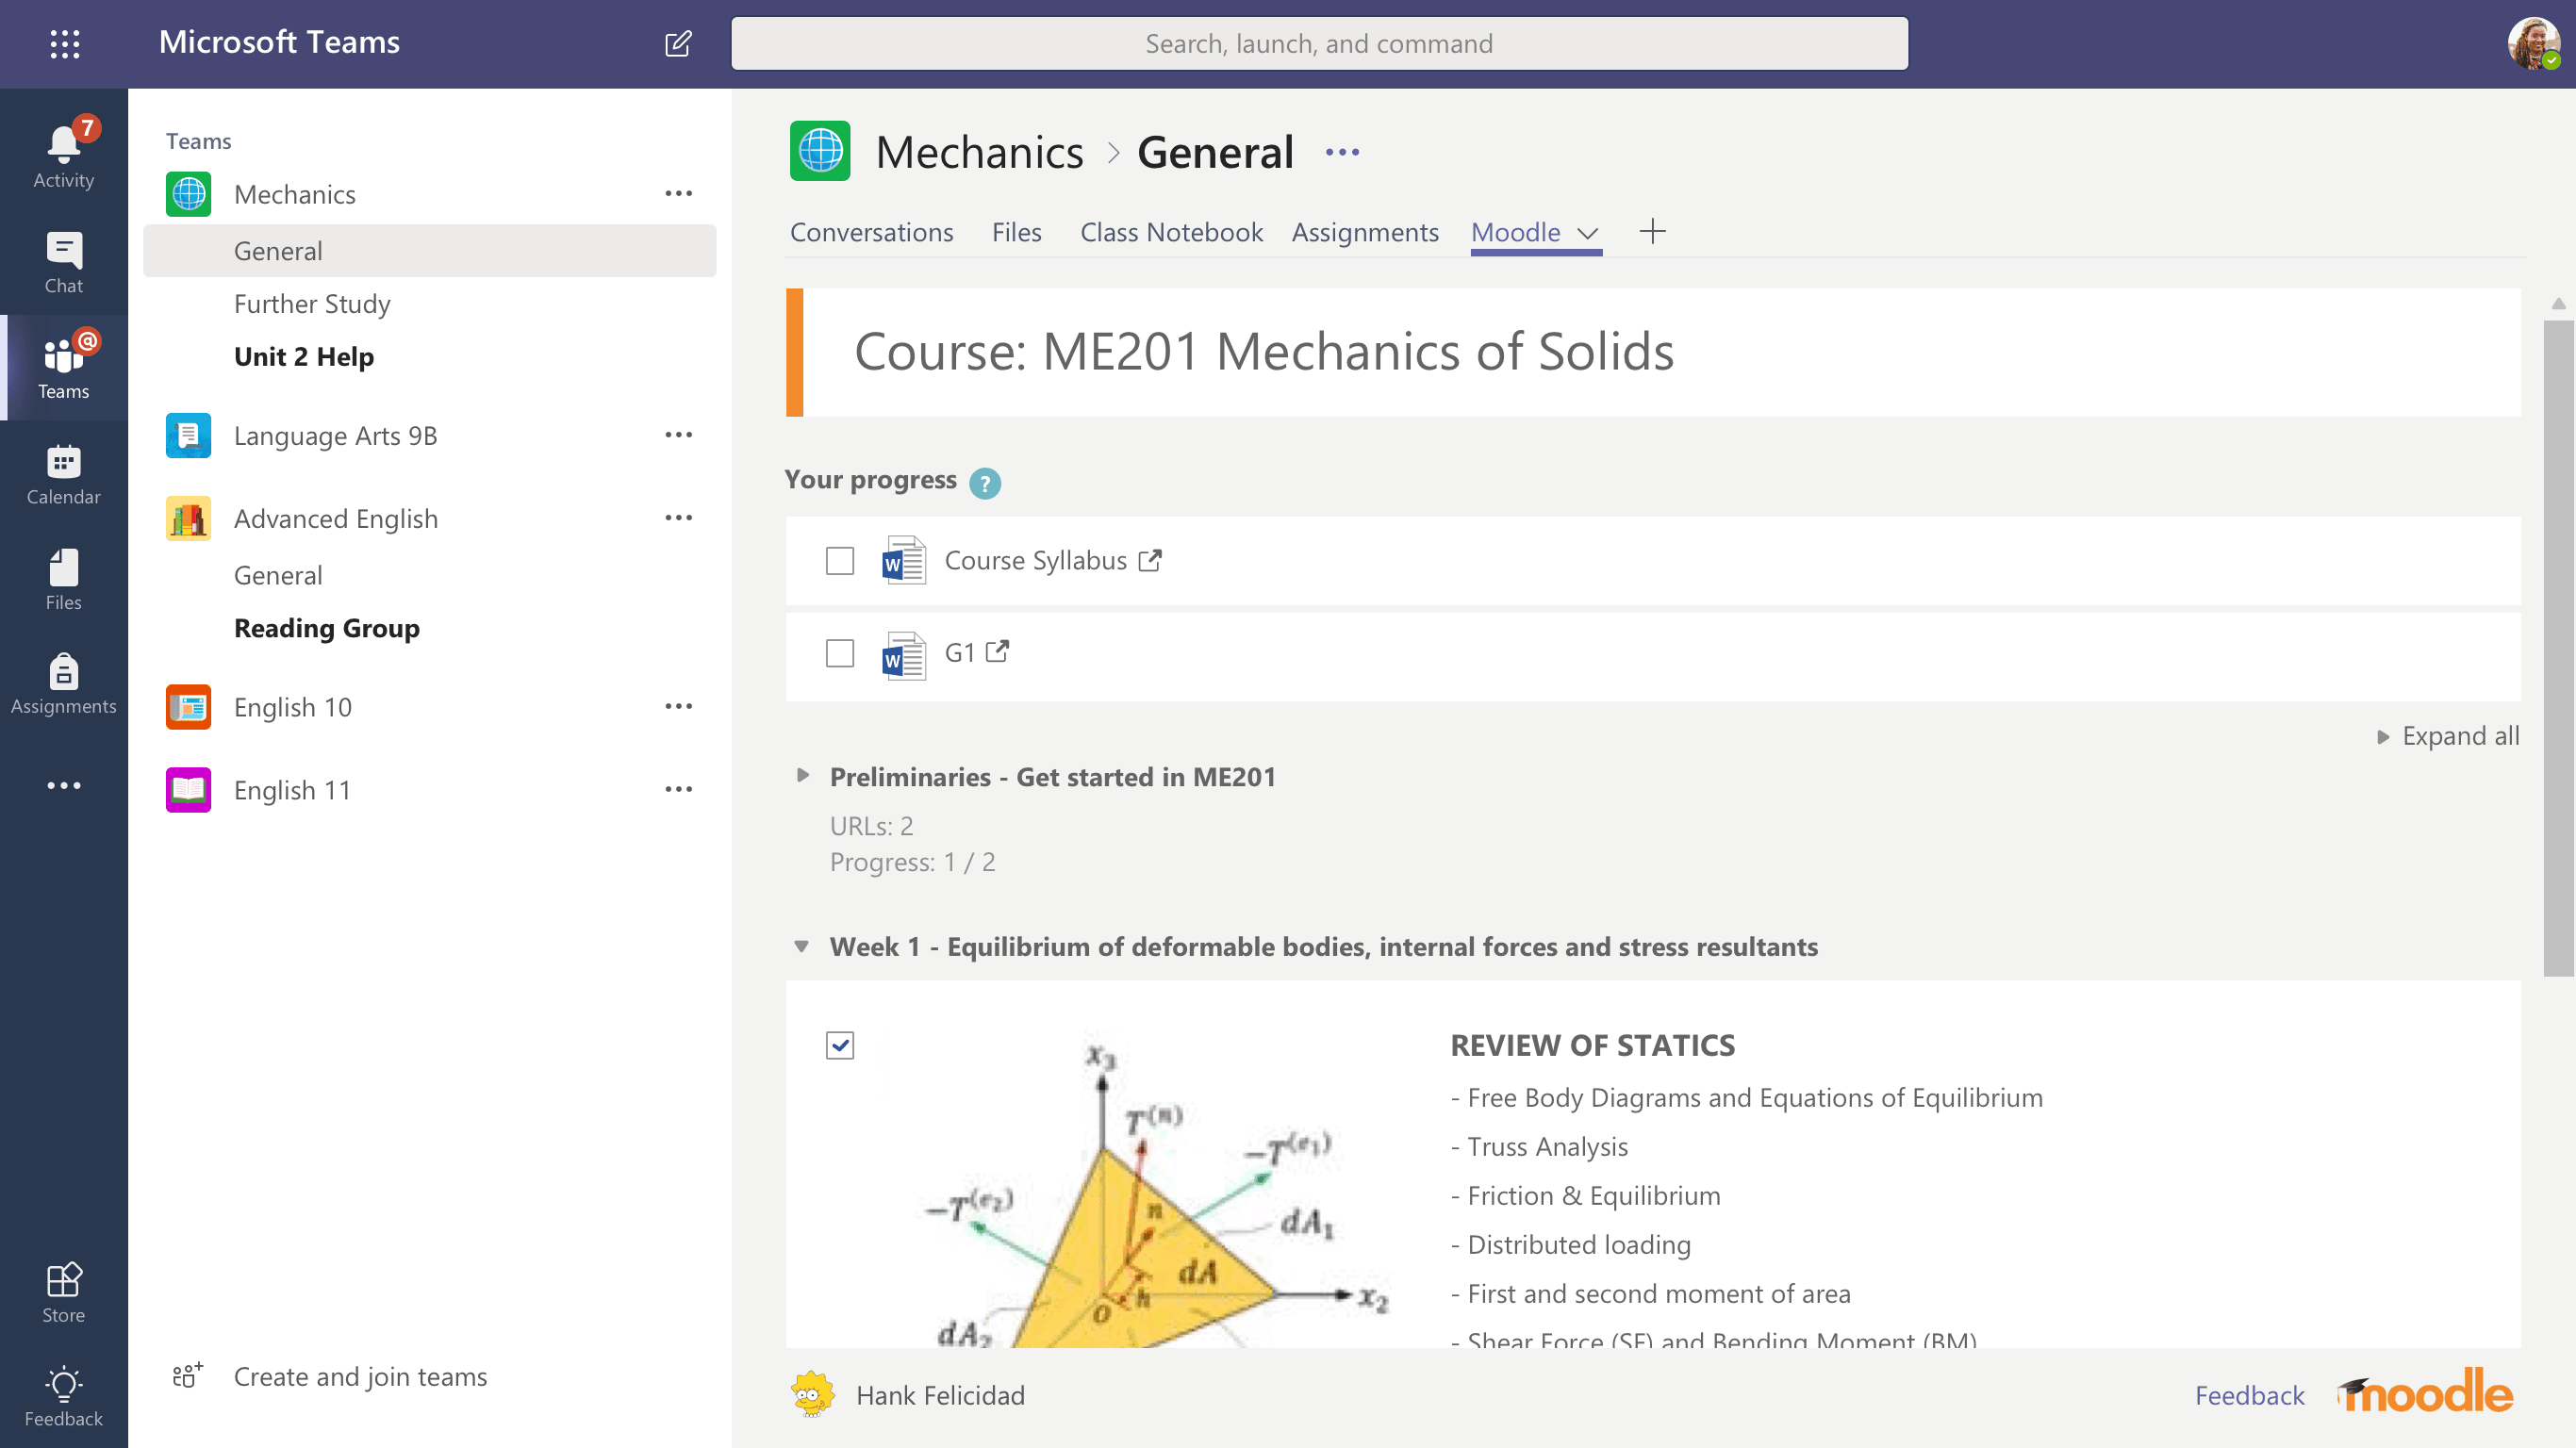 Moodle LMS integration in Microsoft Teams